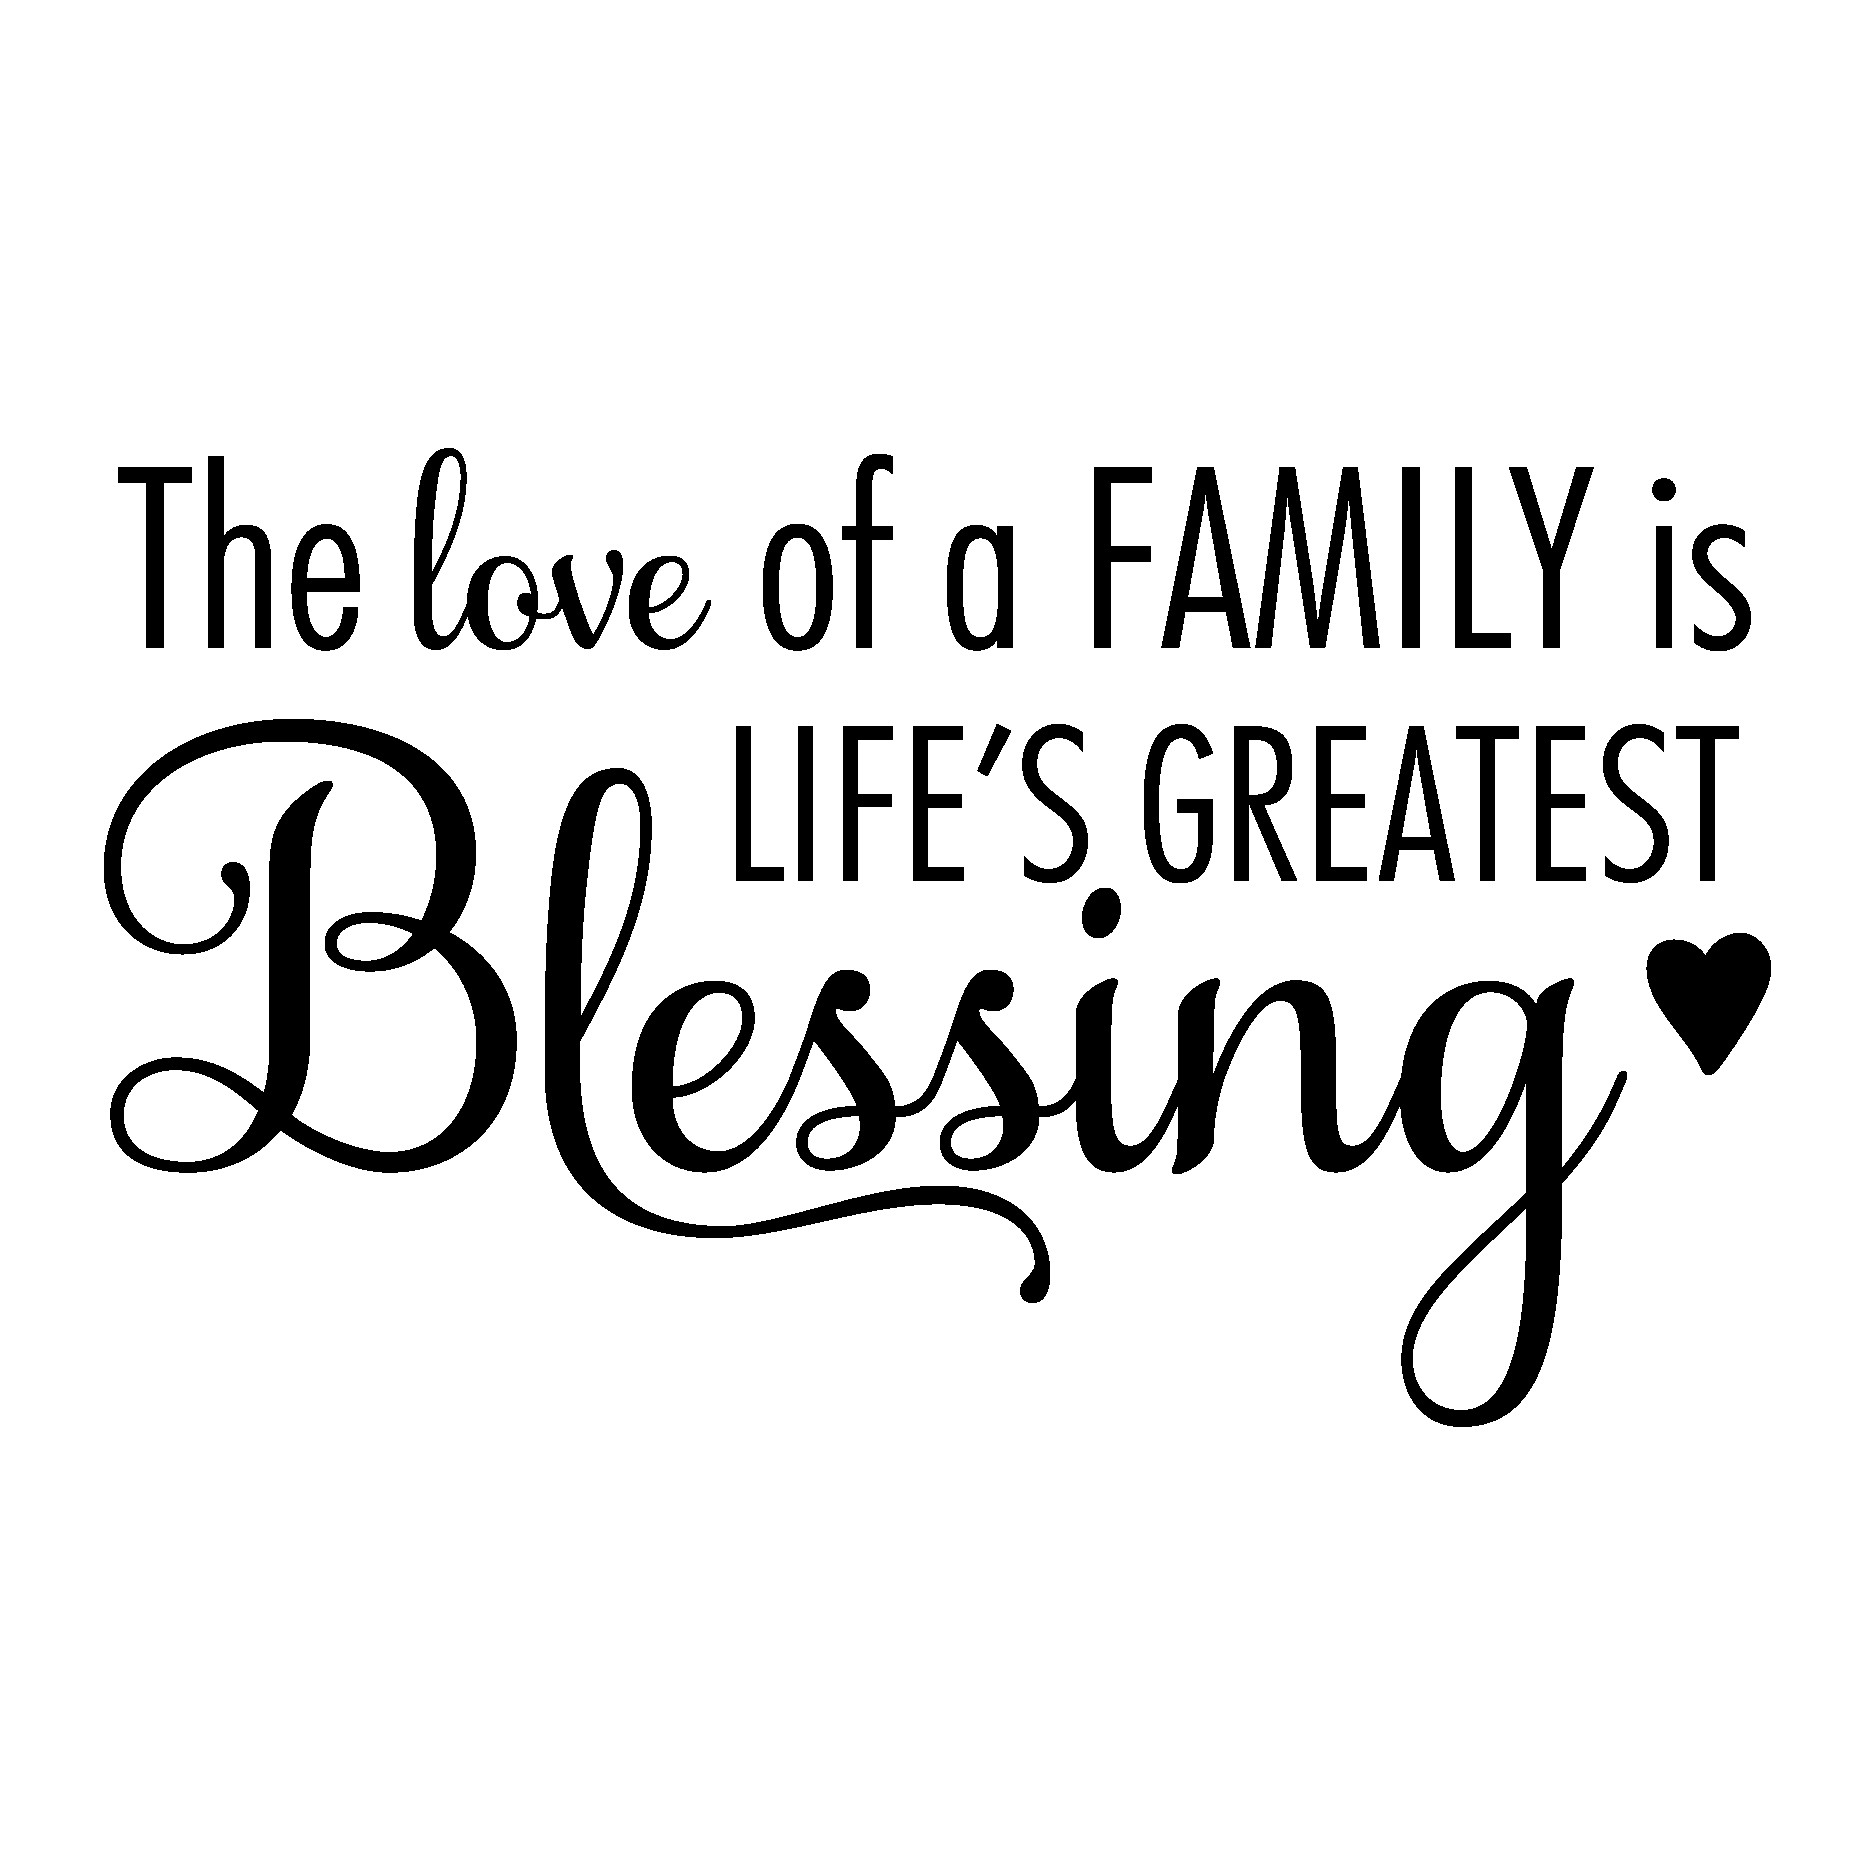 Quotes On Family Love
 The Love of A Family Wall Quotes™ Decal